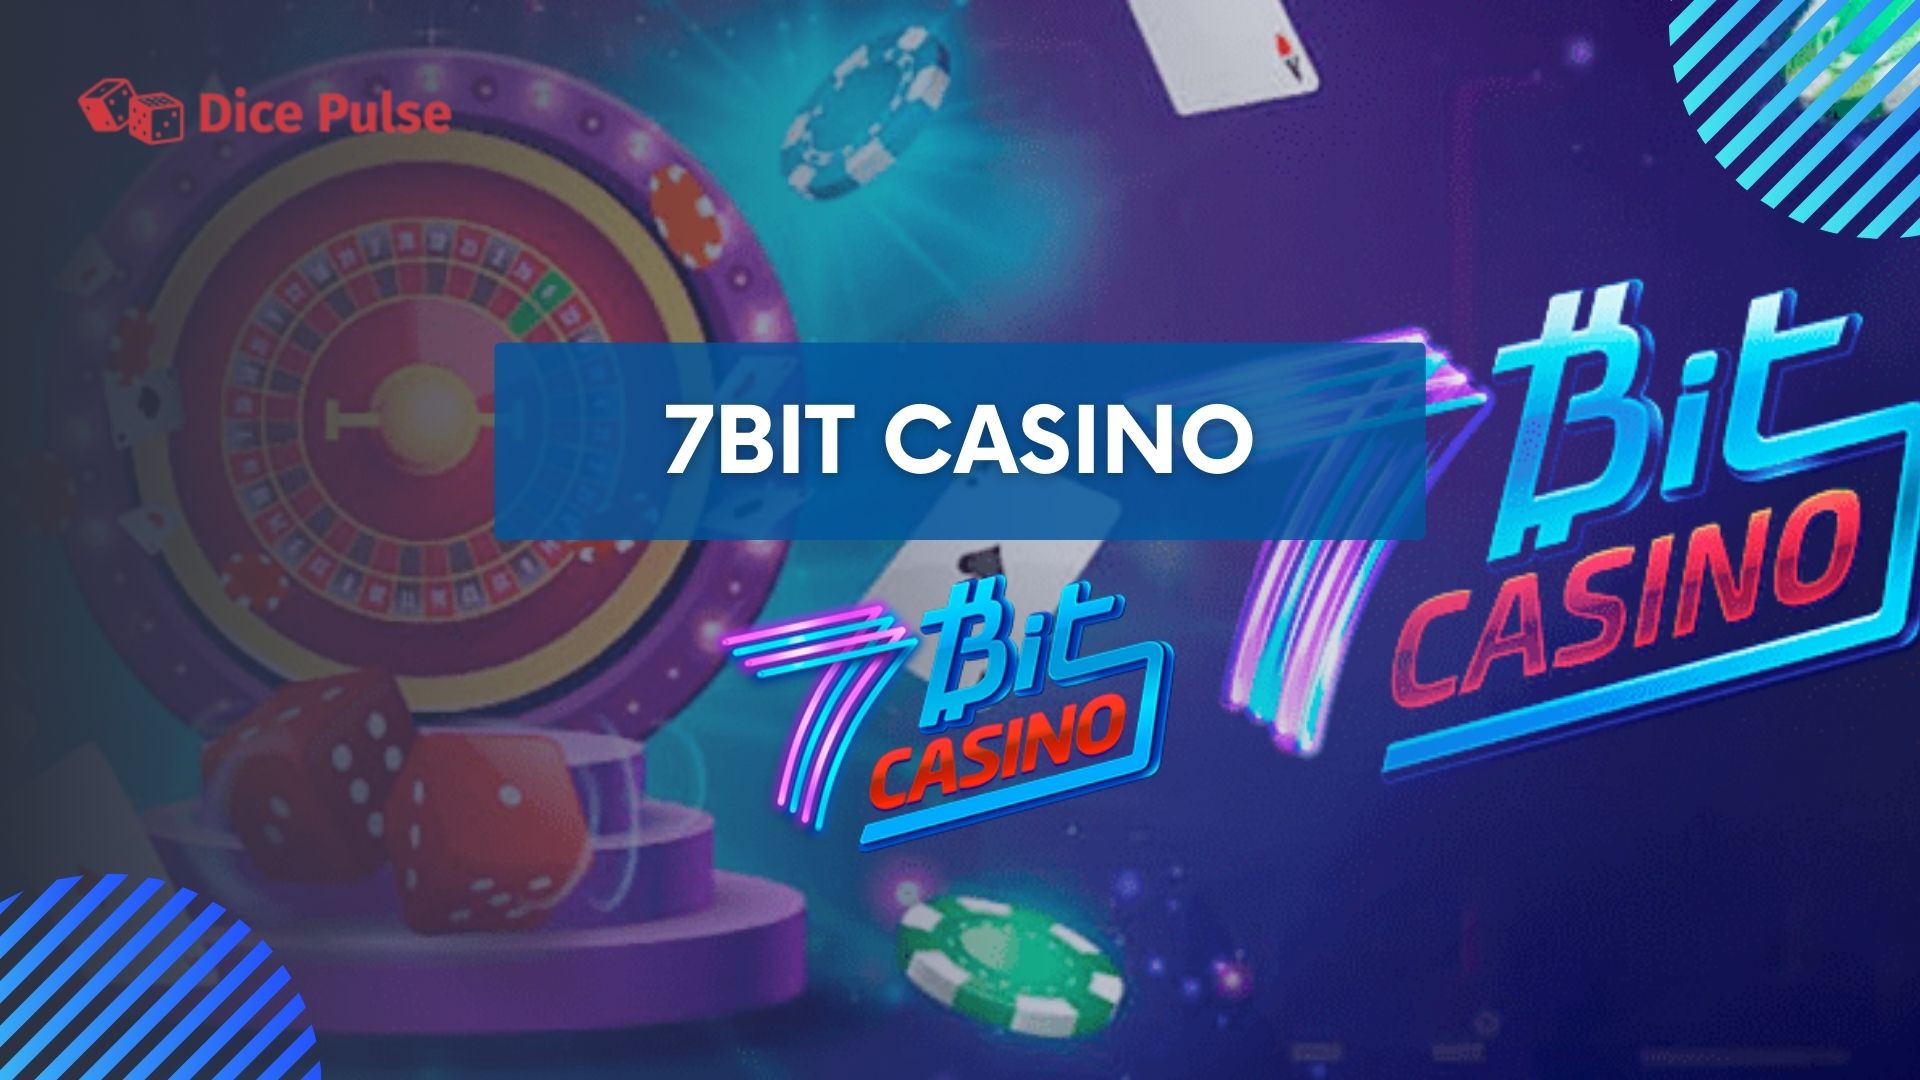 Discover new gambling experience with 7Bit Casino